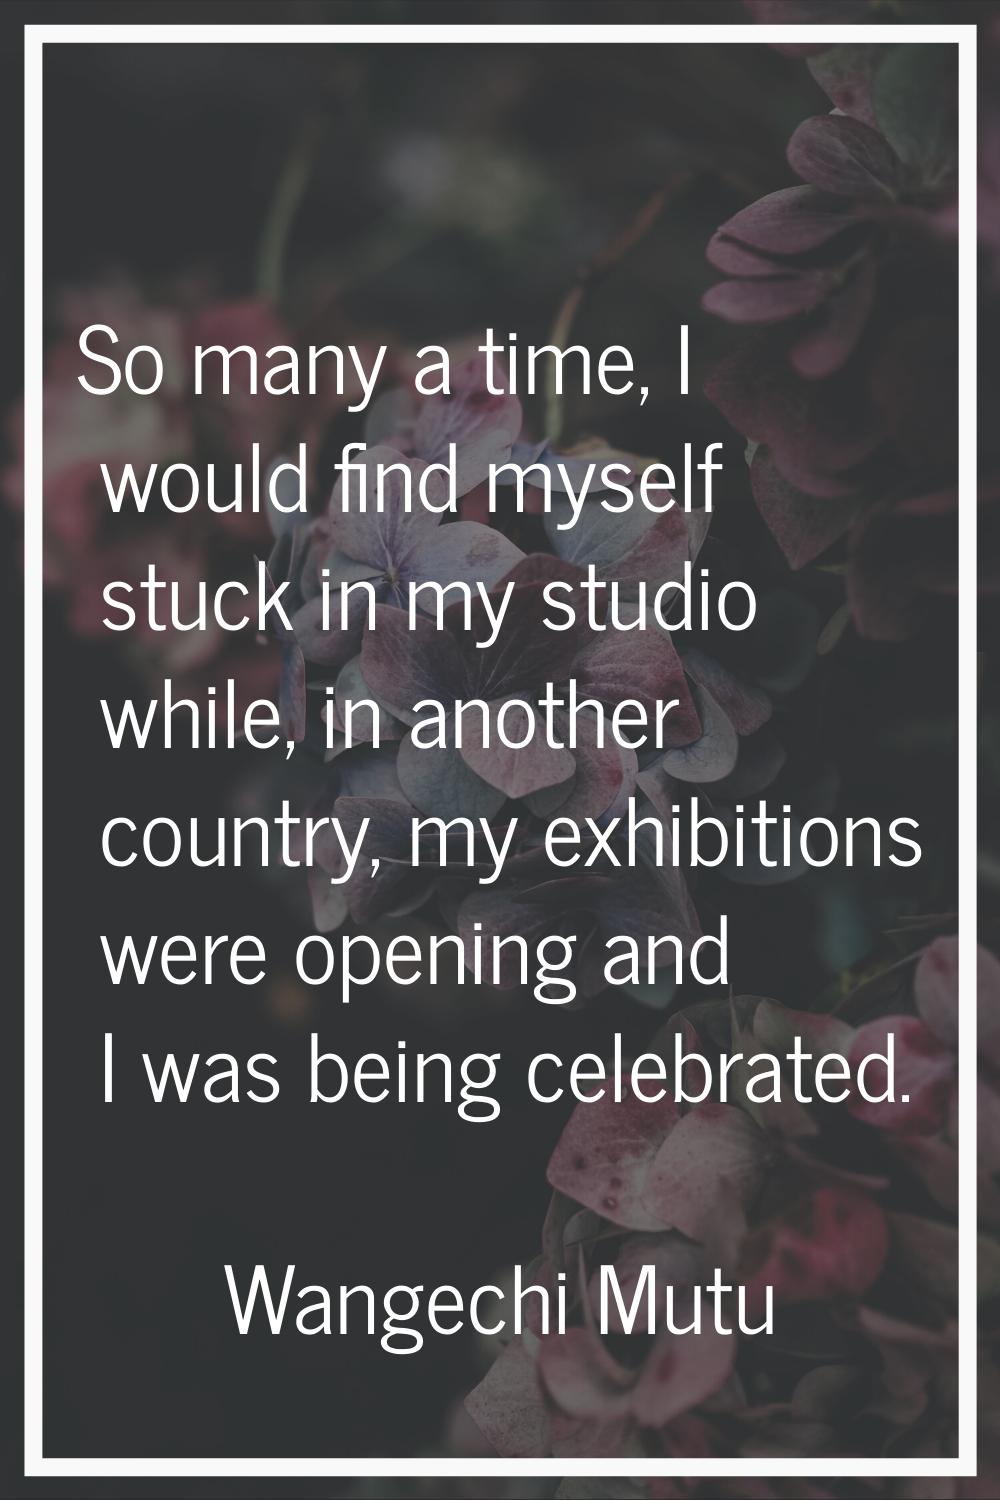 So many a time, I would find myself stuck in my studio while, in another country, my exhibitions we